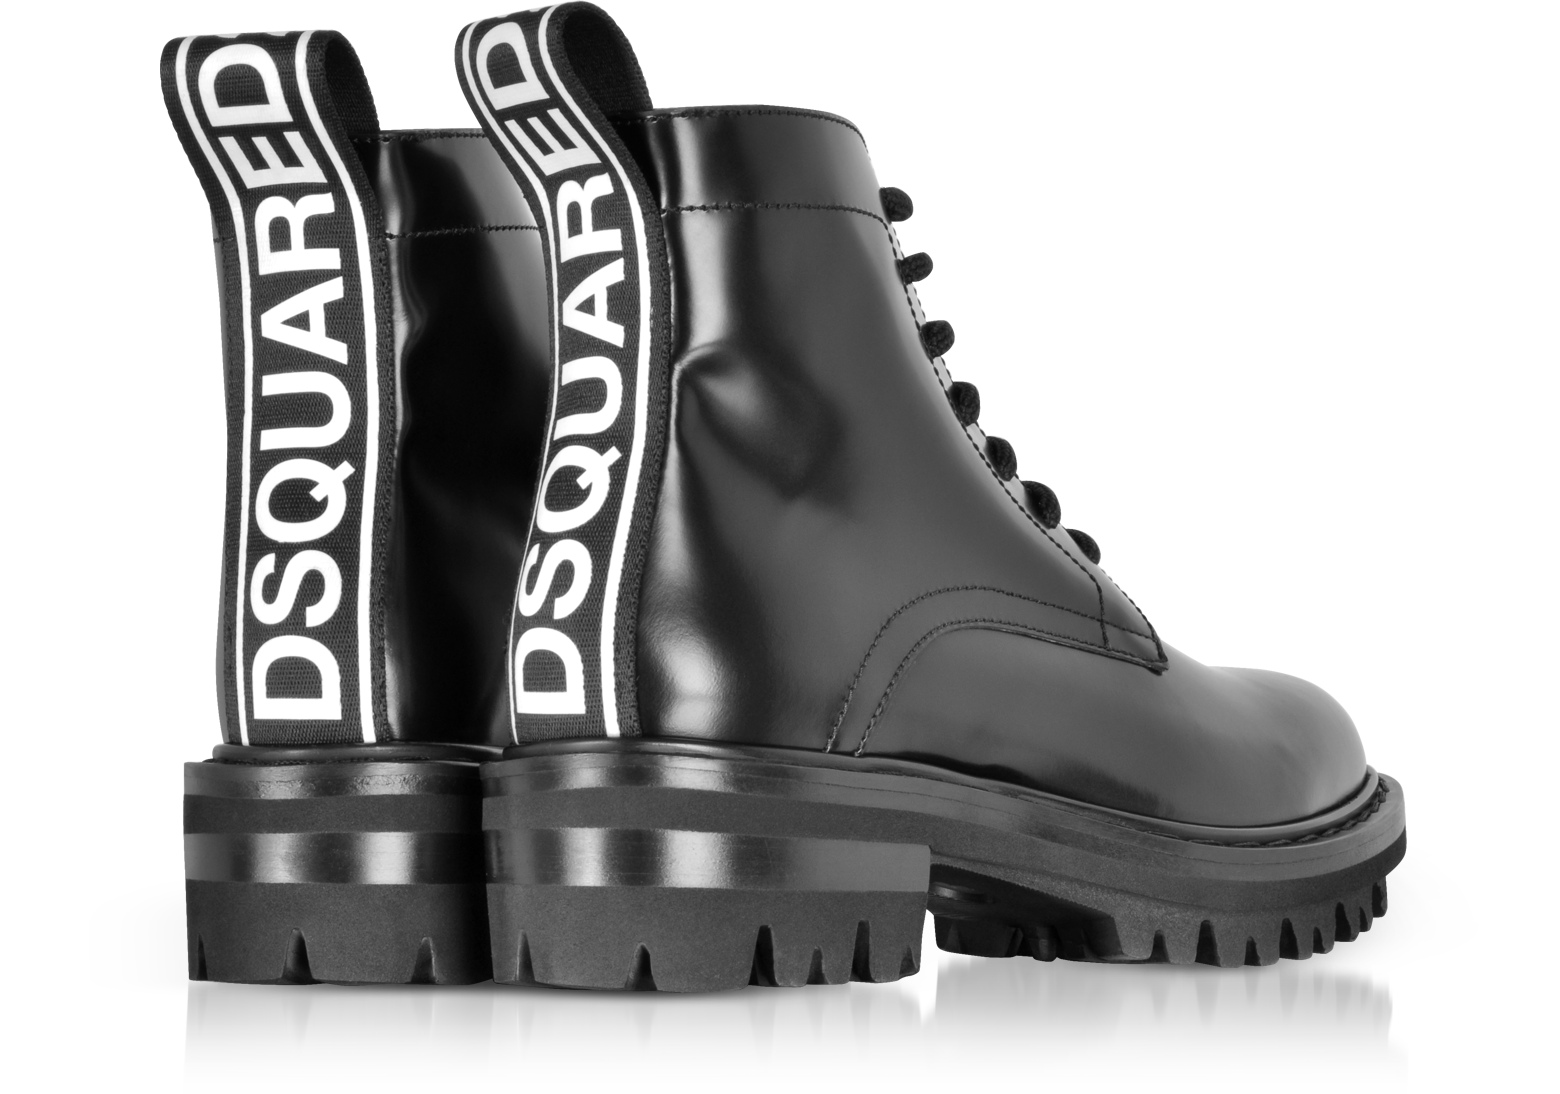 dsquared boot